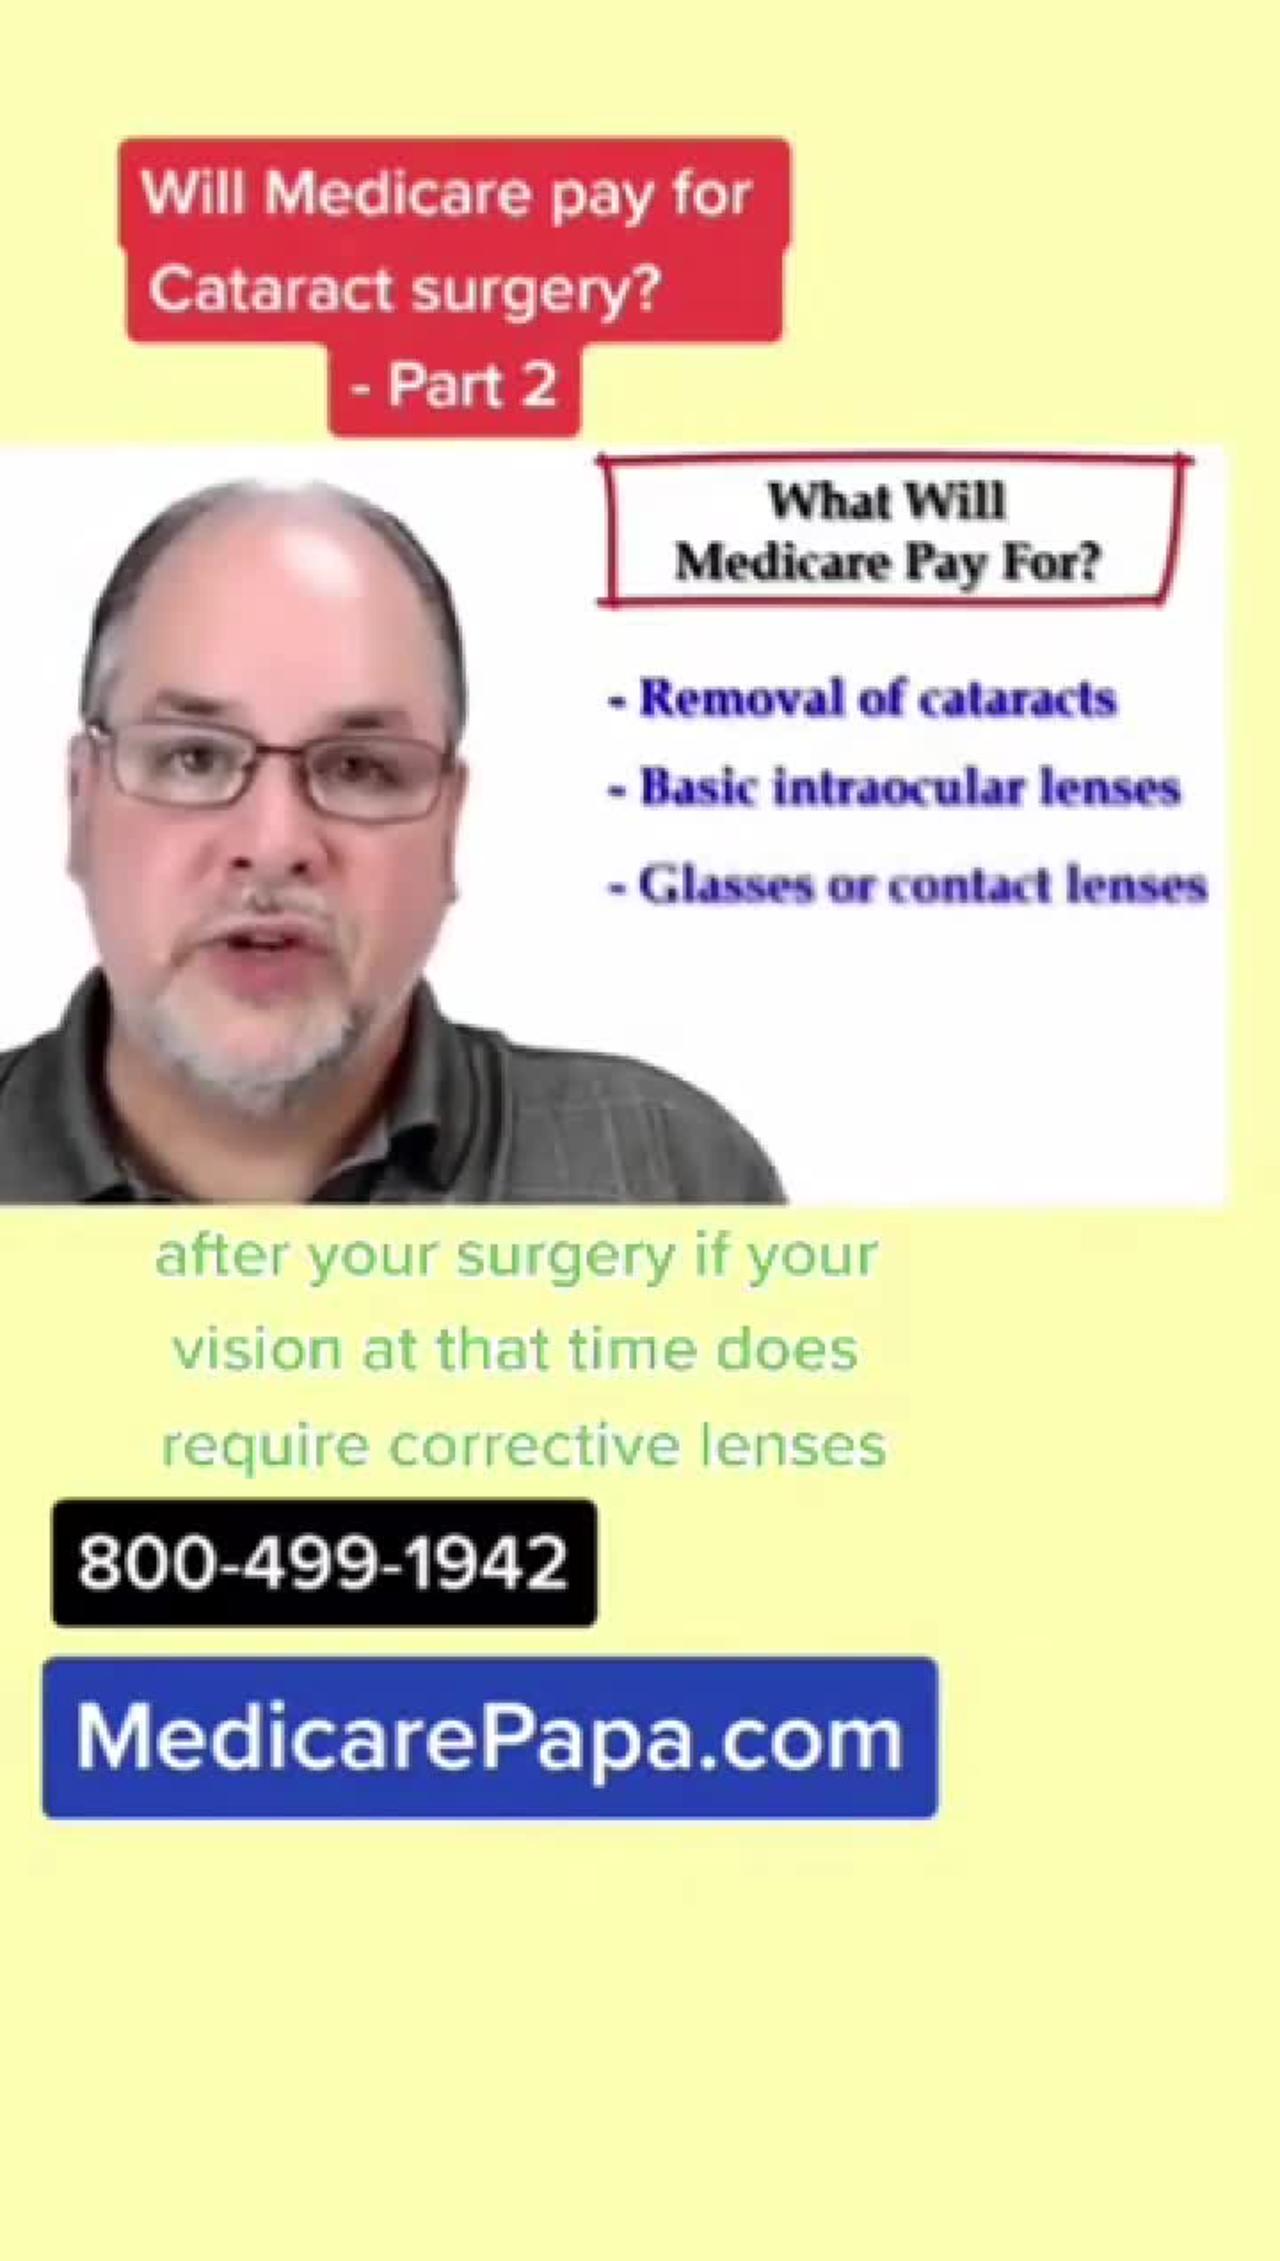 Part 2 - Will your Medicare health coverage help pay for the cost if cataract surgery?